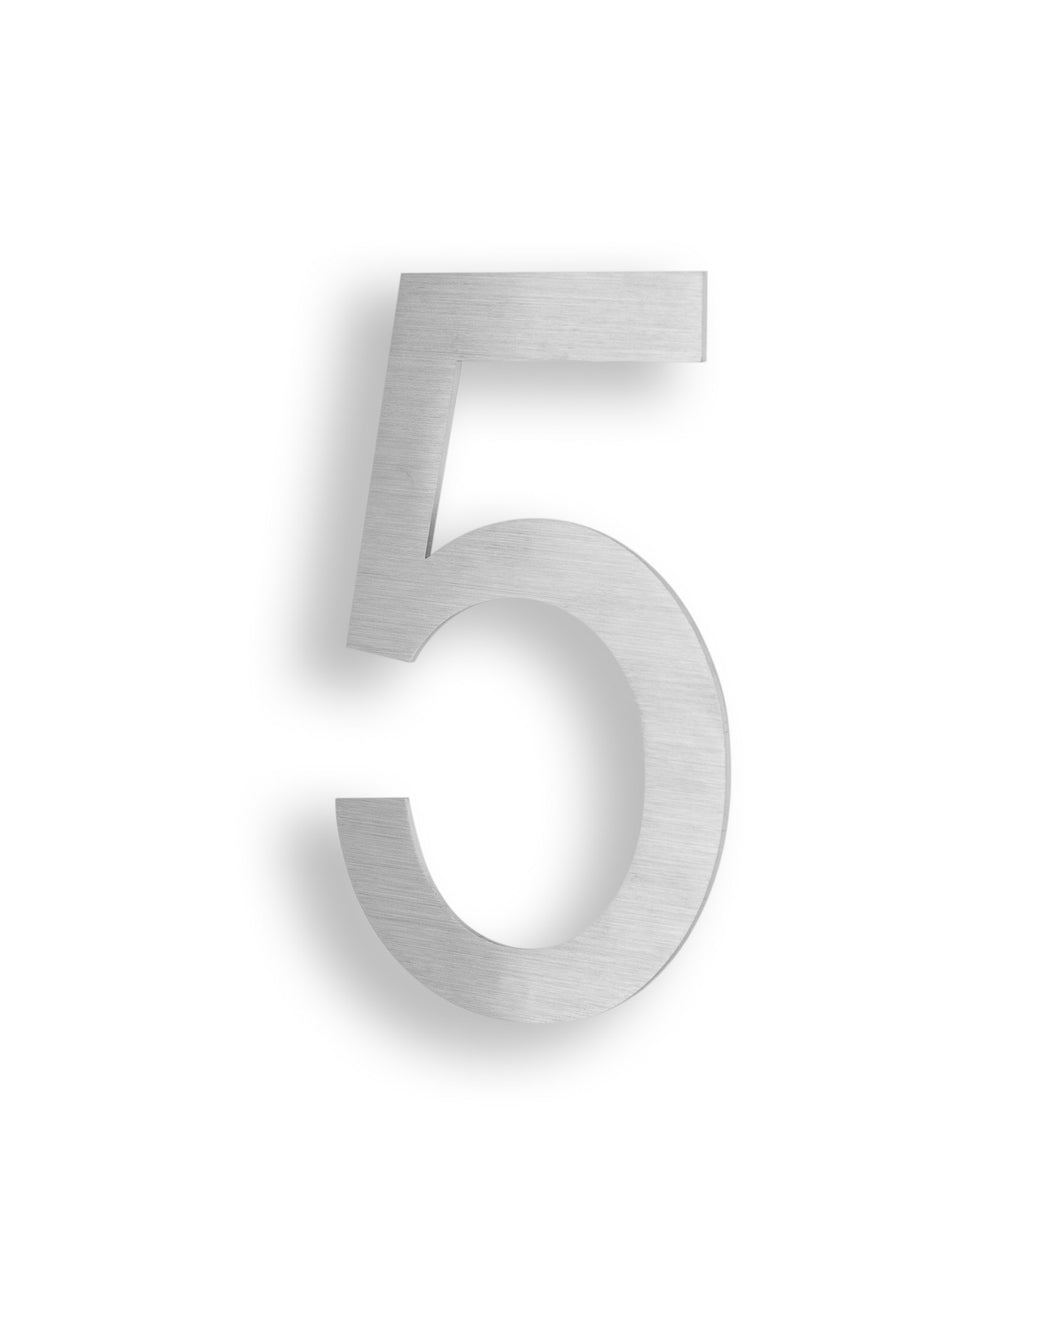 6 Inch 2D Stainless Steel House Number Five